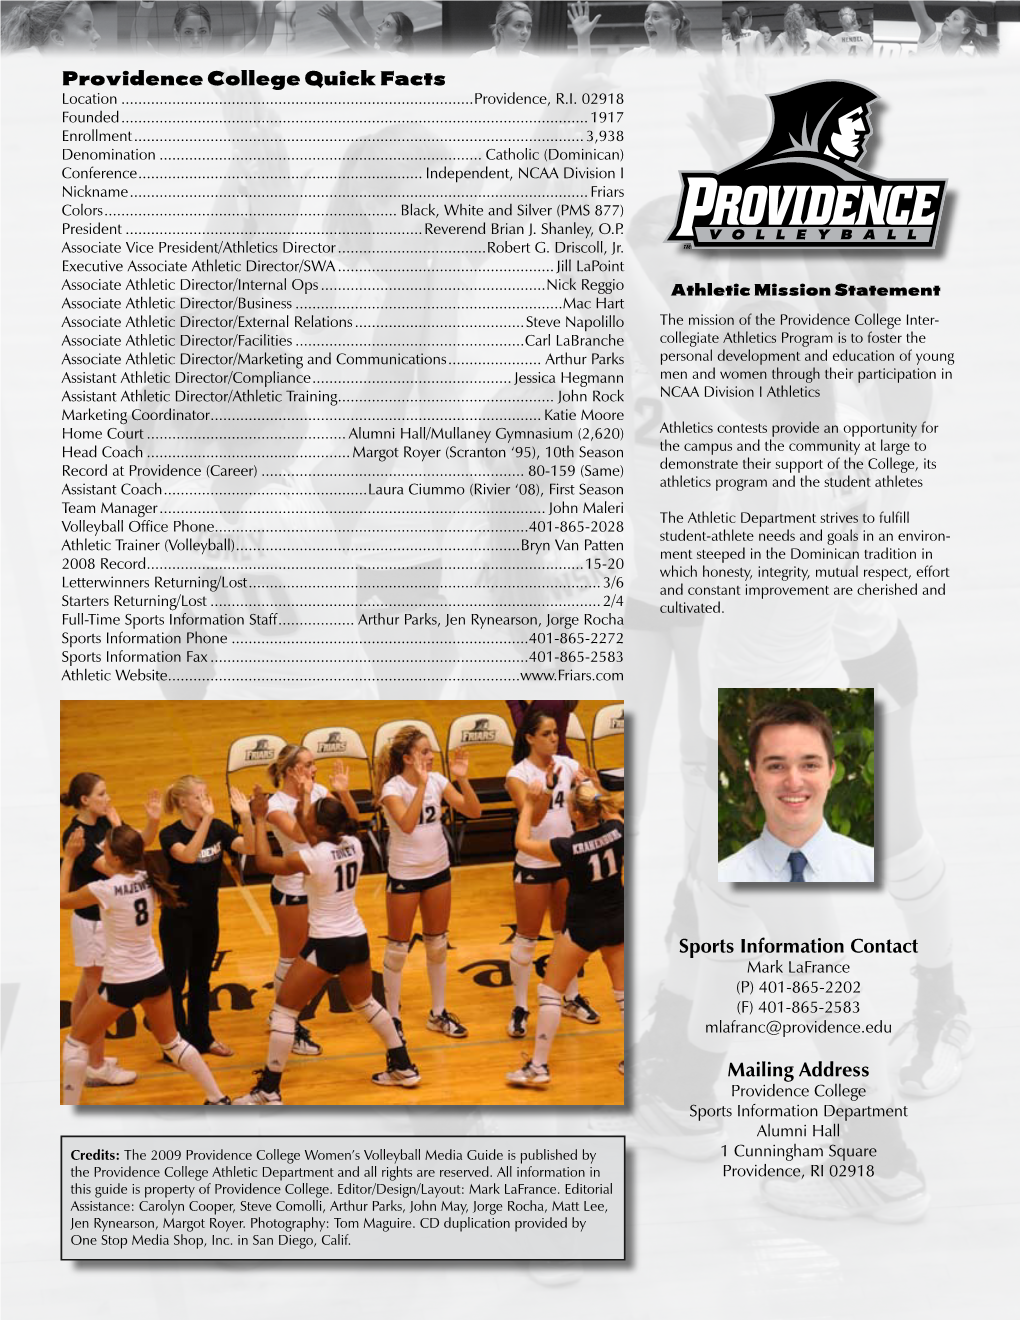 Providence College Quick Facts Sports Information Contact Mailing